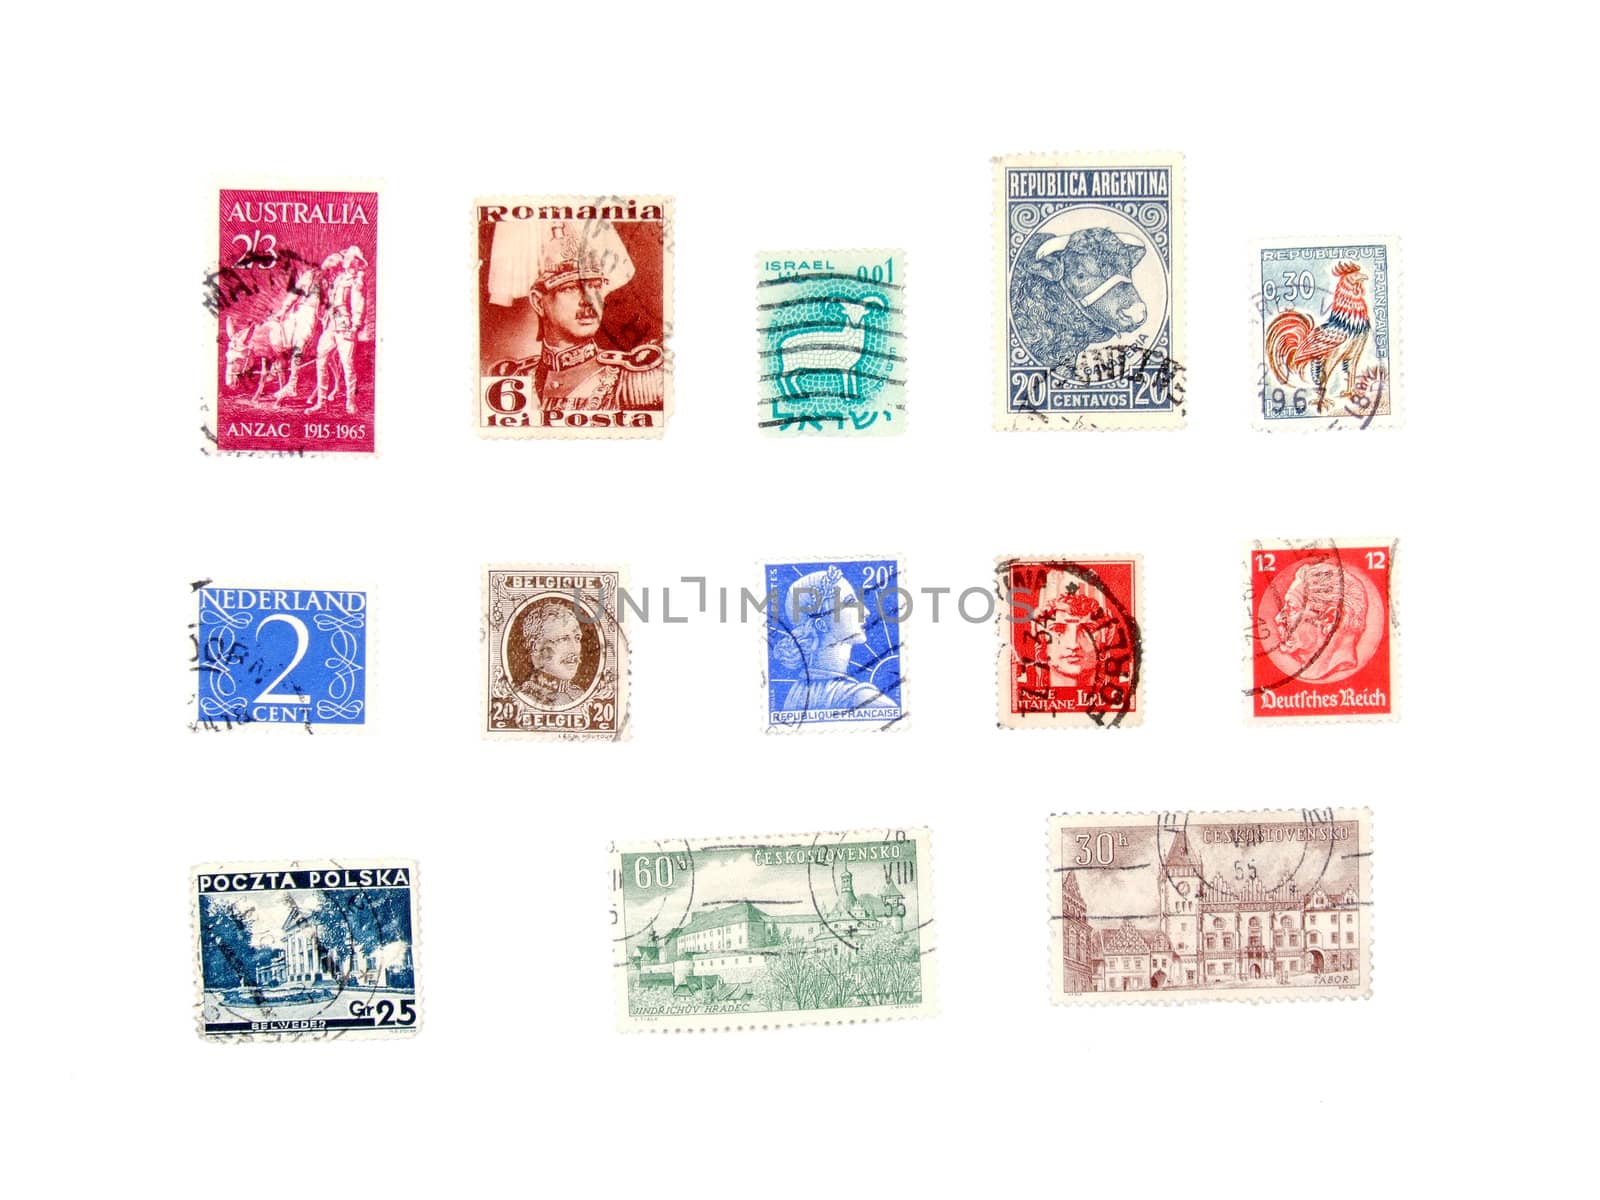 Postage stamps from various continents and countries: Netherlands, Belgium, Italy, Romania, Australia, Israel, Argentina, France, Czechoslovakia, Poland.